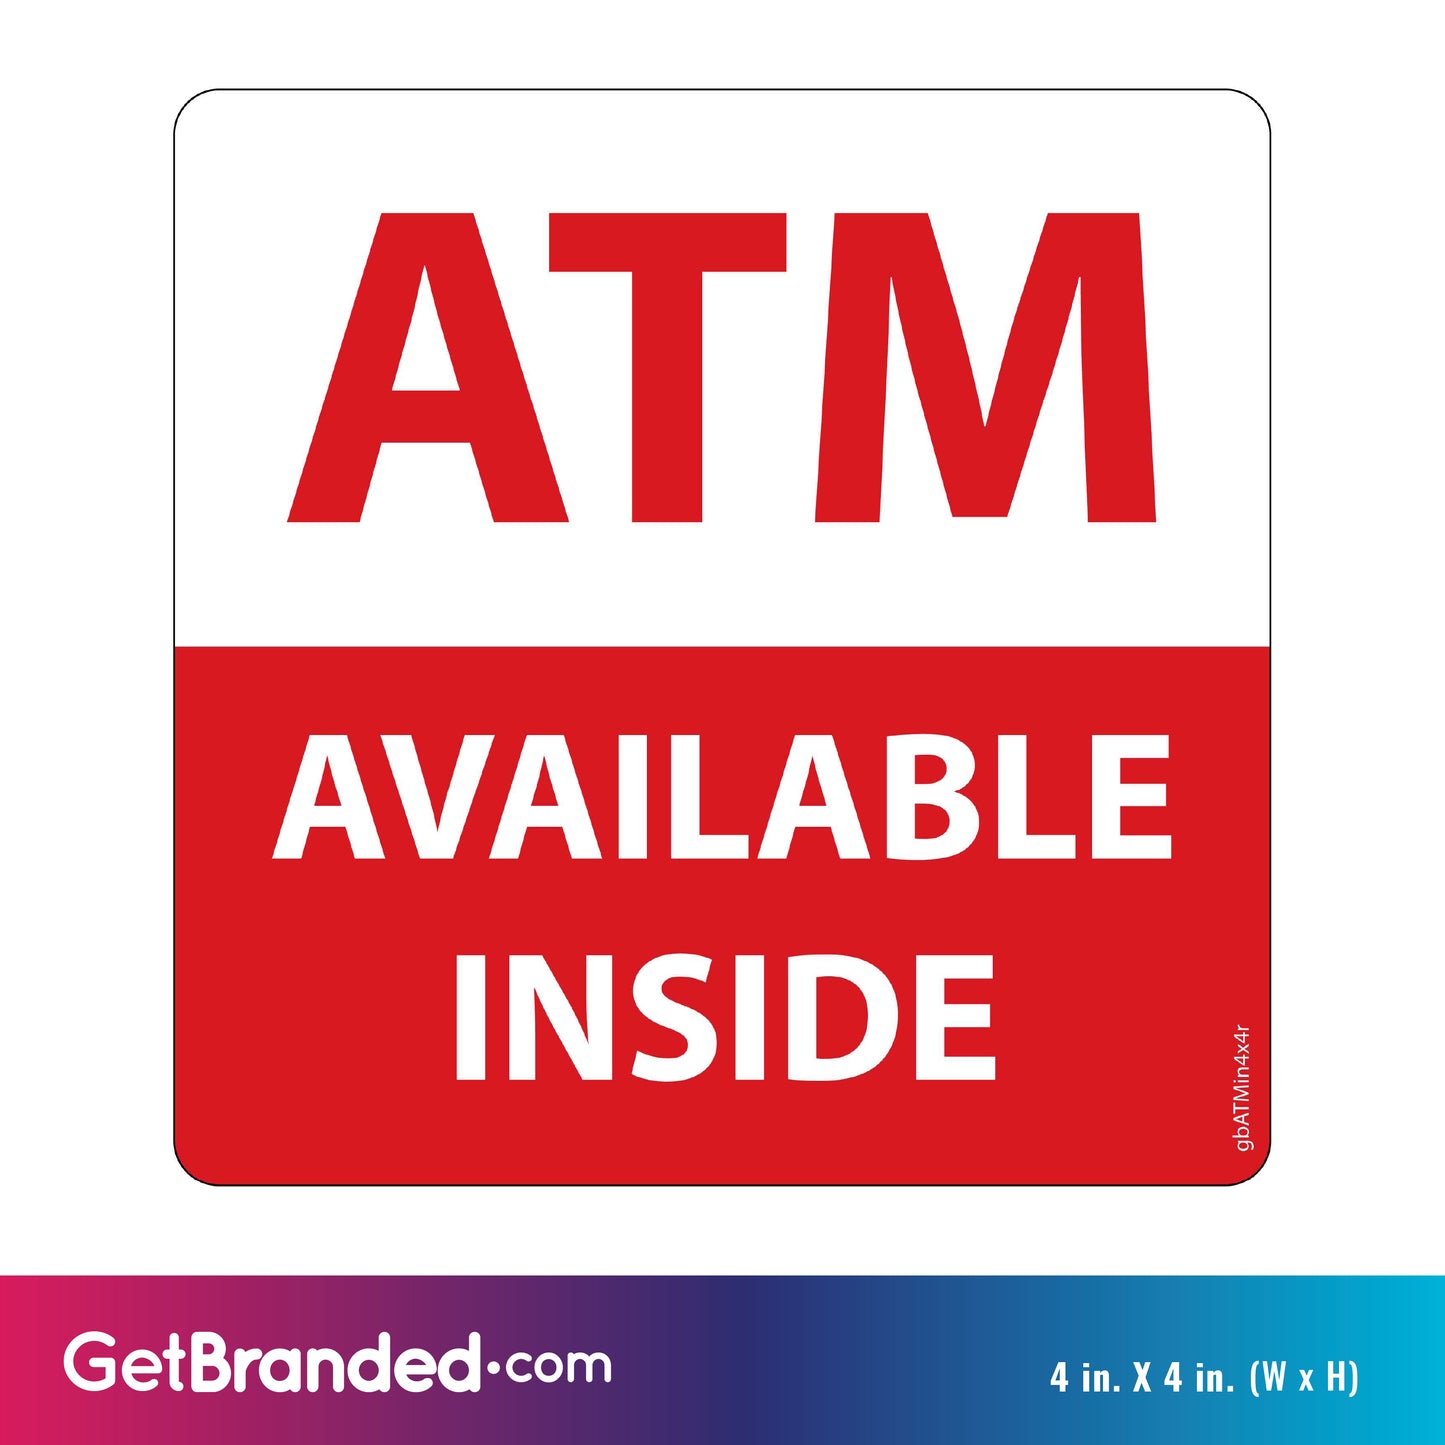 ATM Available Inside, Red and White Decal size guide. 4 inches by 4 inches in size. 